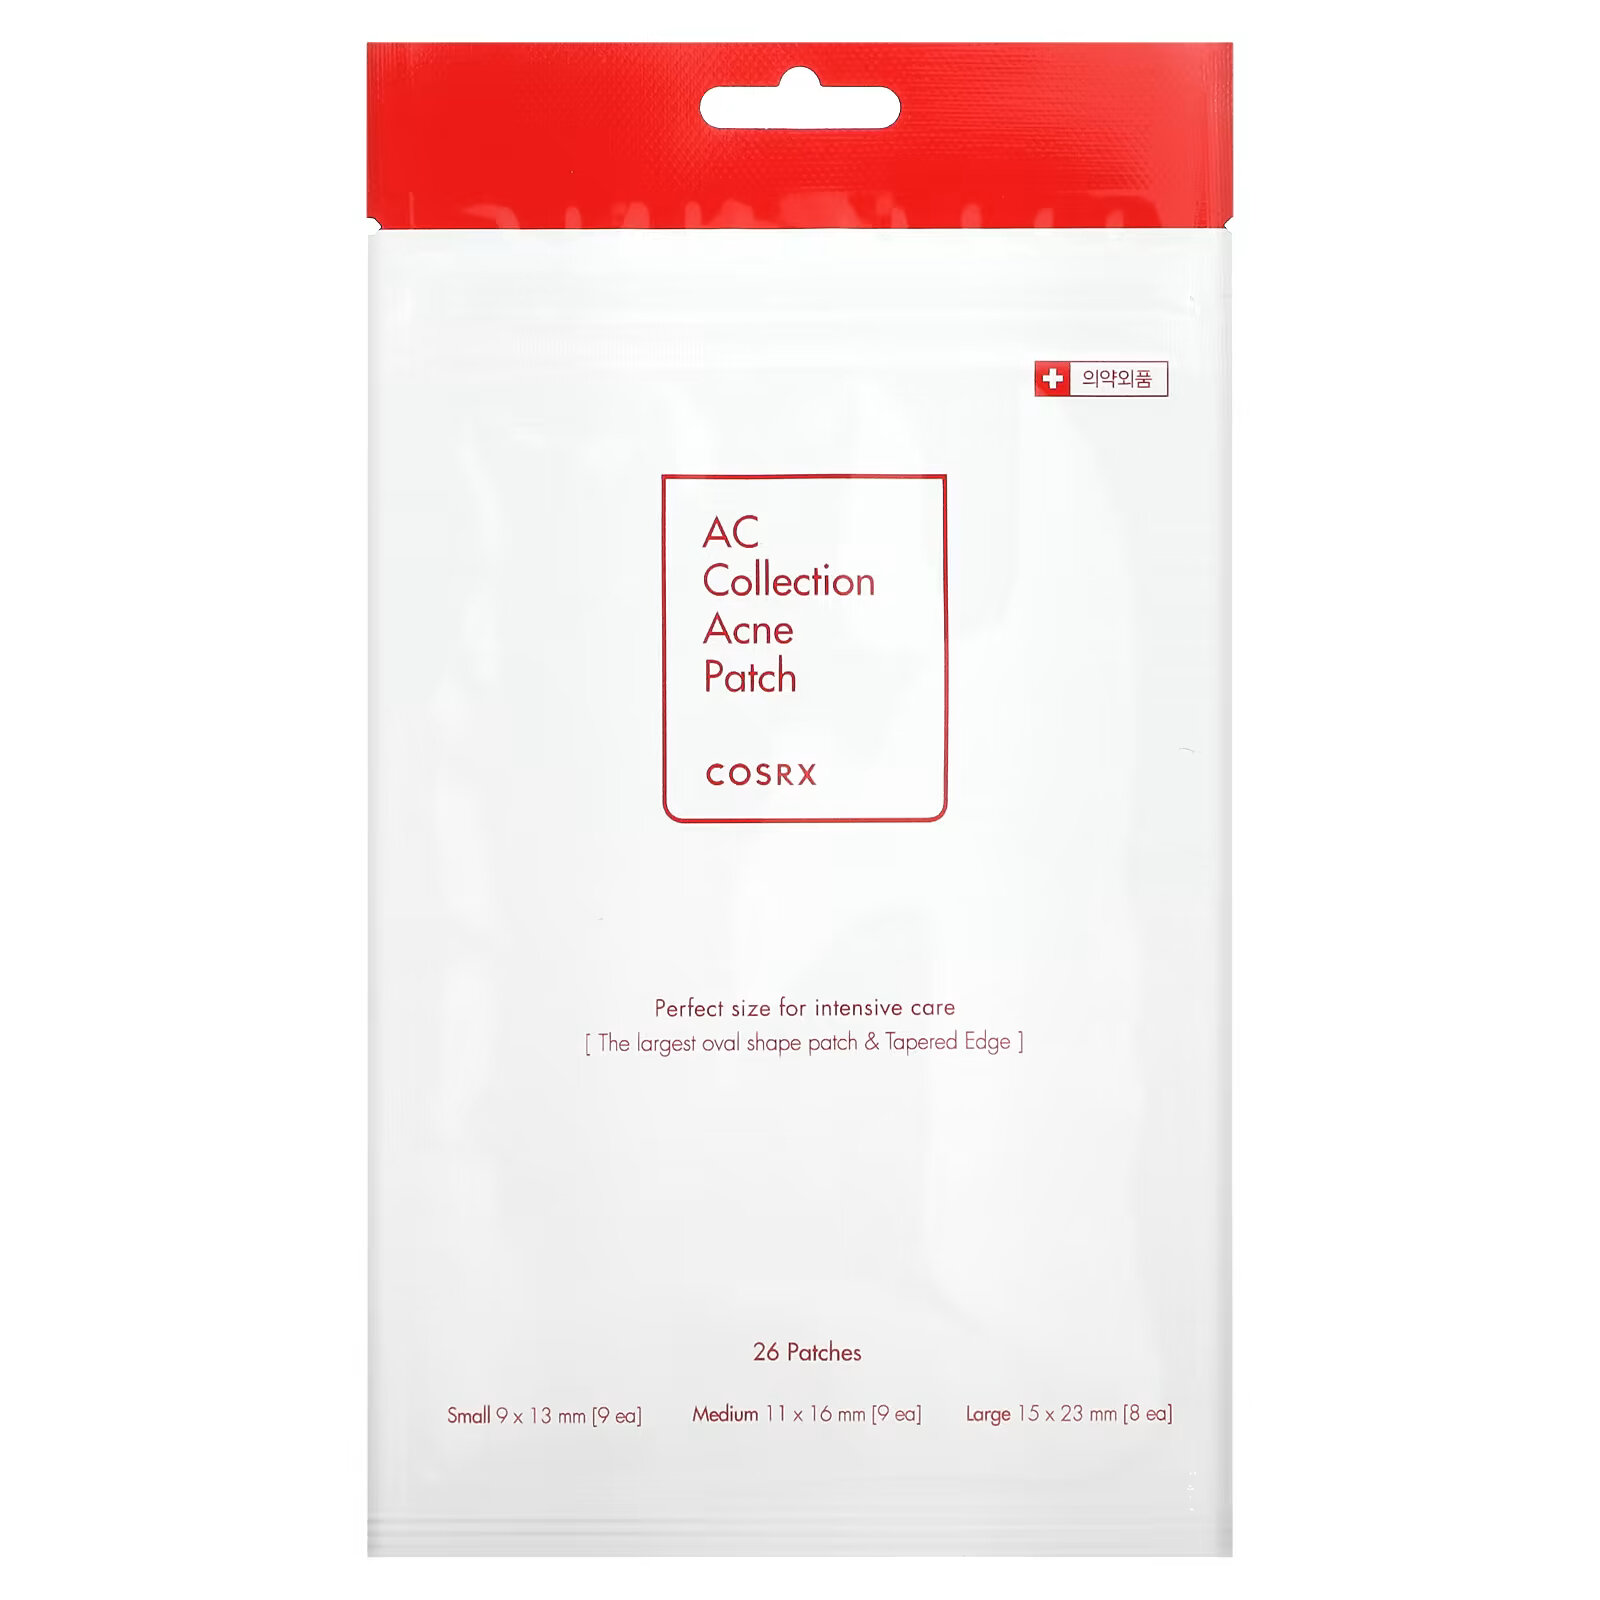 cosrx патчи от акне ac collection acne patch 10 г 26 мл Cosrx, AC Collection, патч от акне, 26 шт.